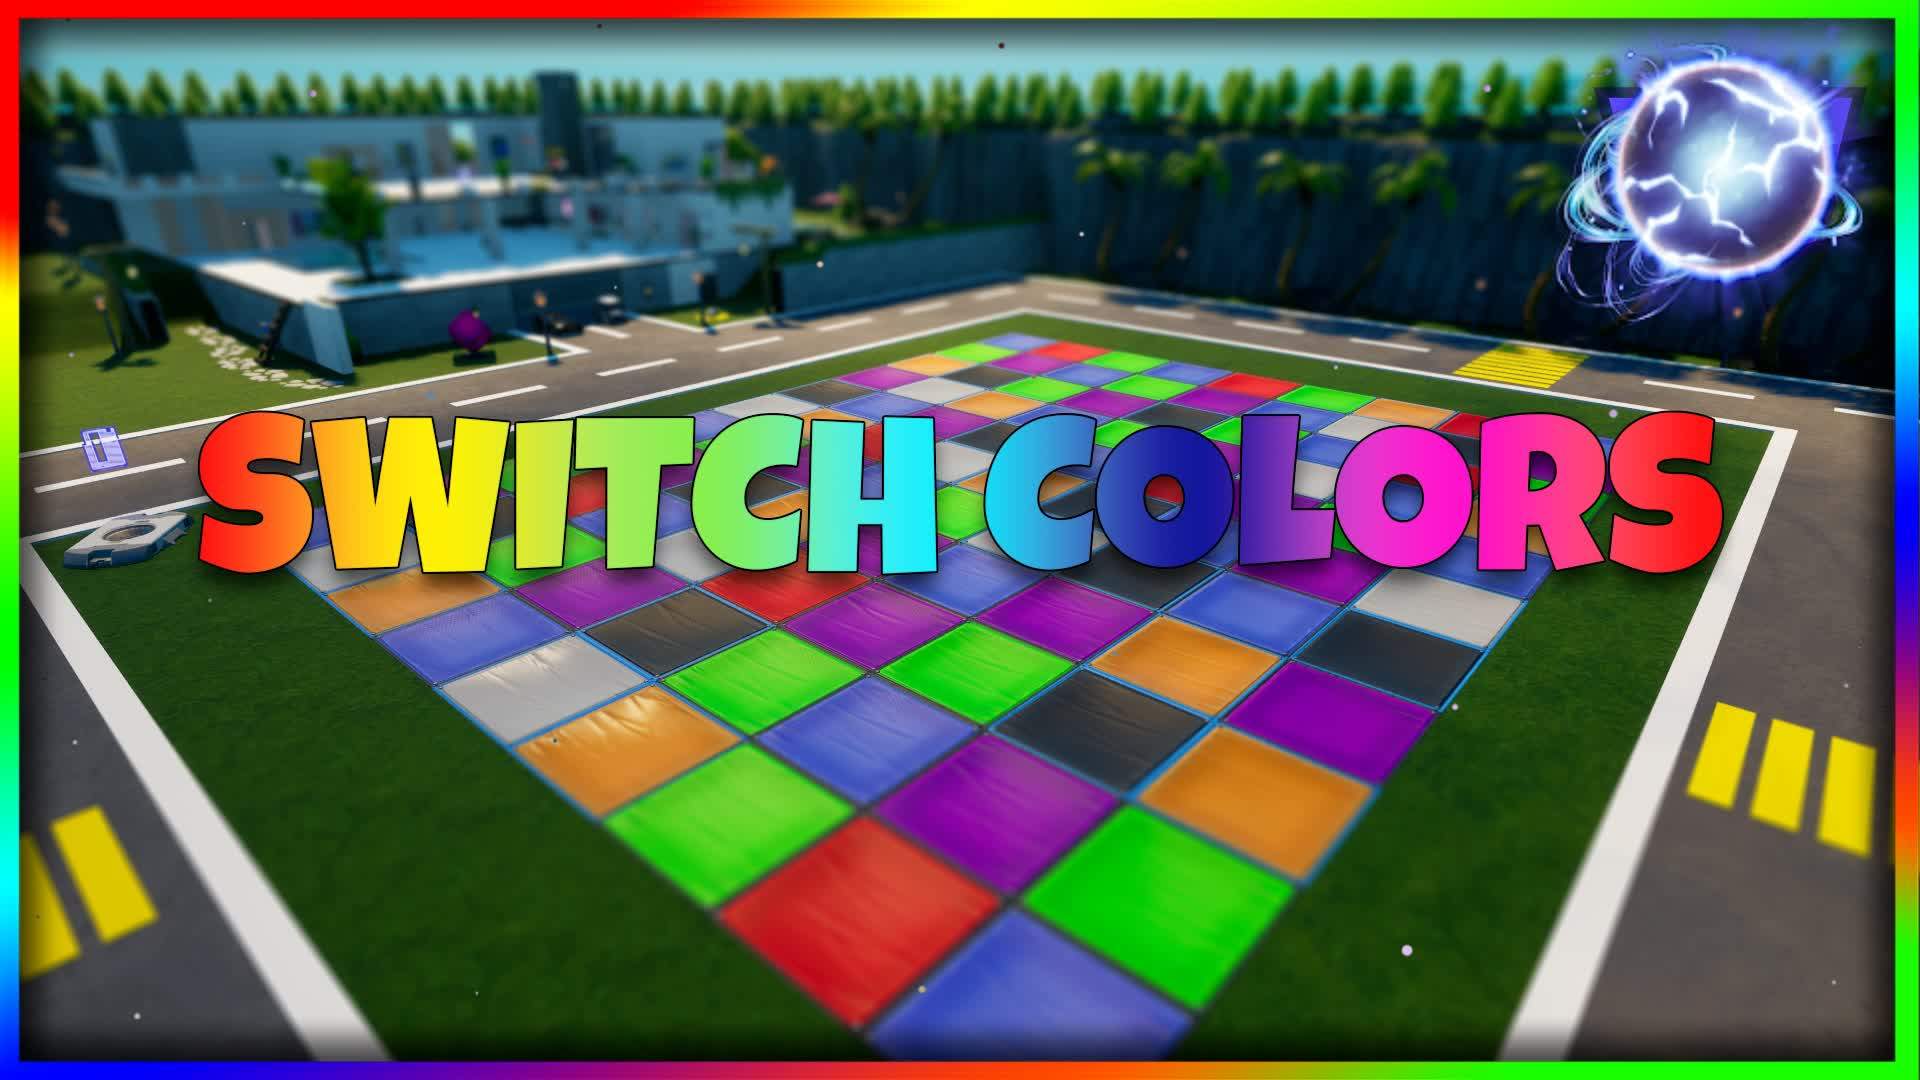 Starting Switch colors